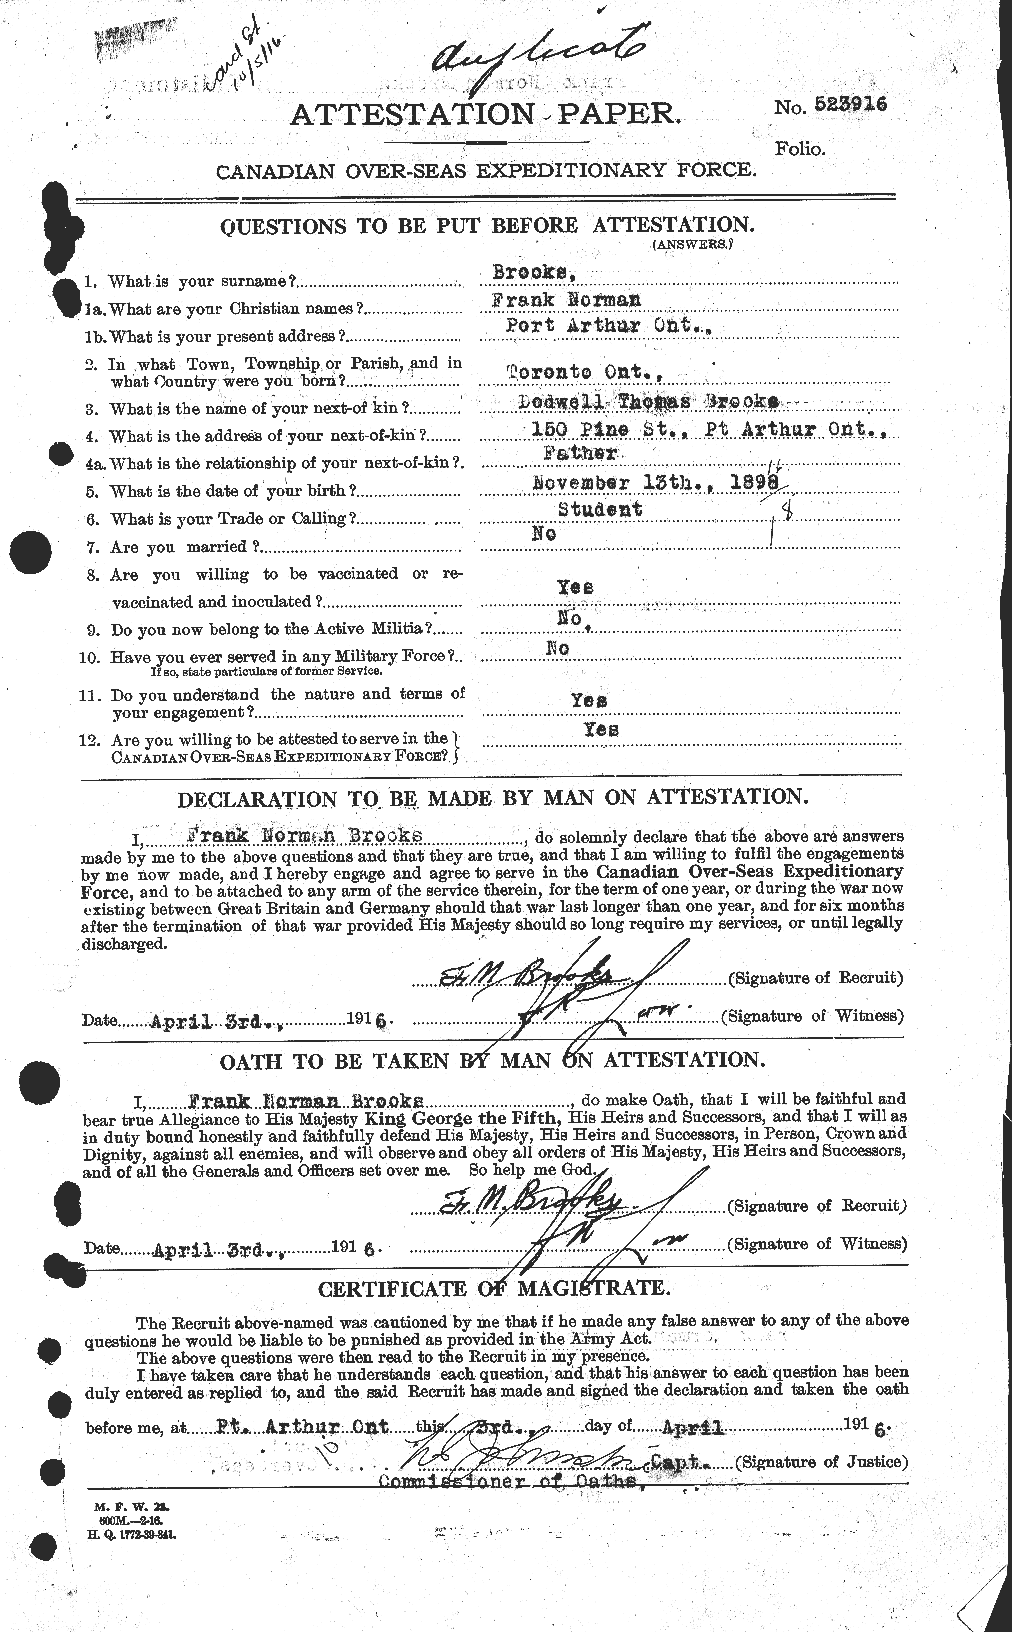 Personnel Records of the First World War - CEF 261613a